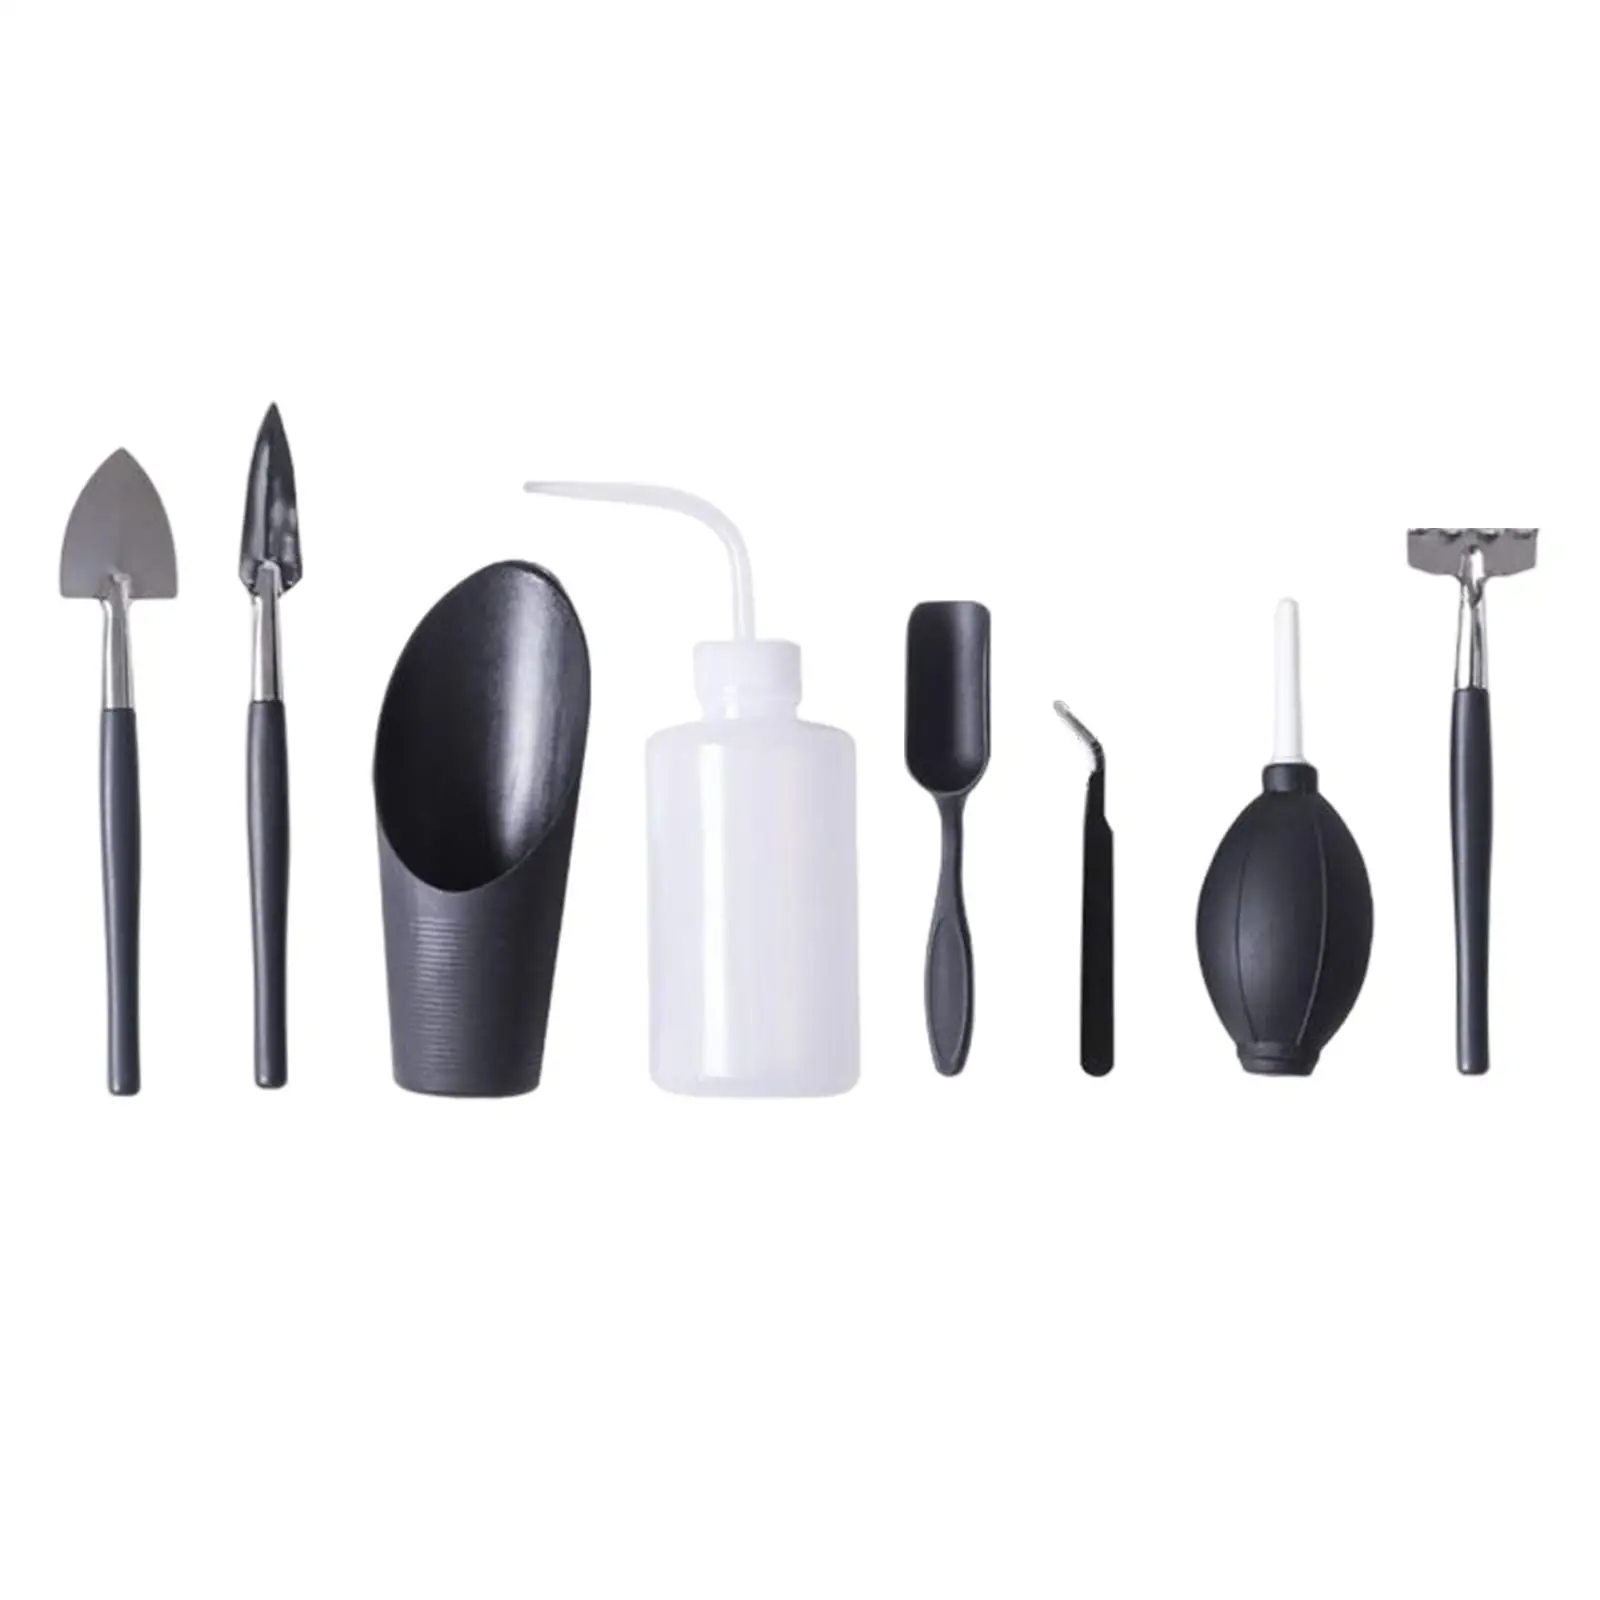  Garden Transplanting Tools 8 Pieces Easy to Wash Simple to Use Accessories  , PP Materials Durable Lightweight